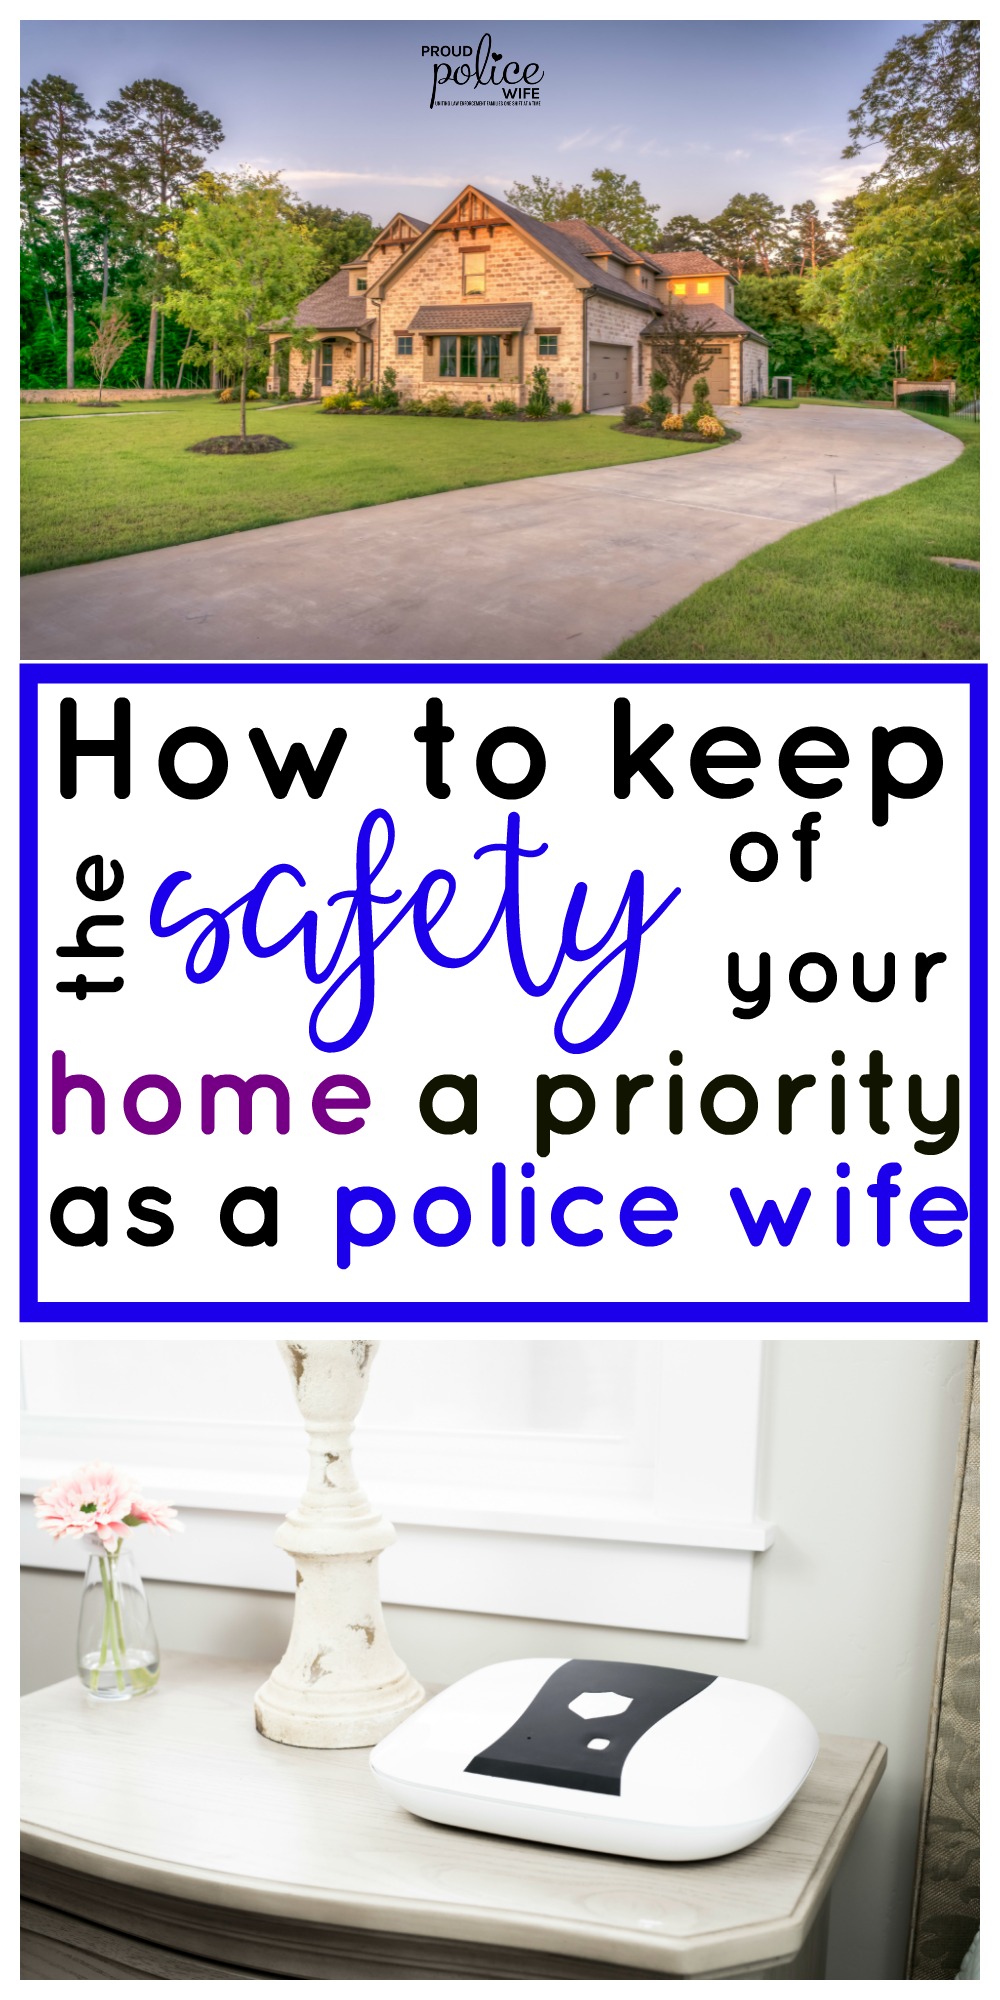 How to keep the safety of your home a priority as a police wife